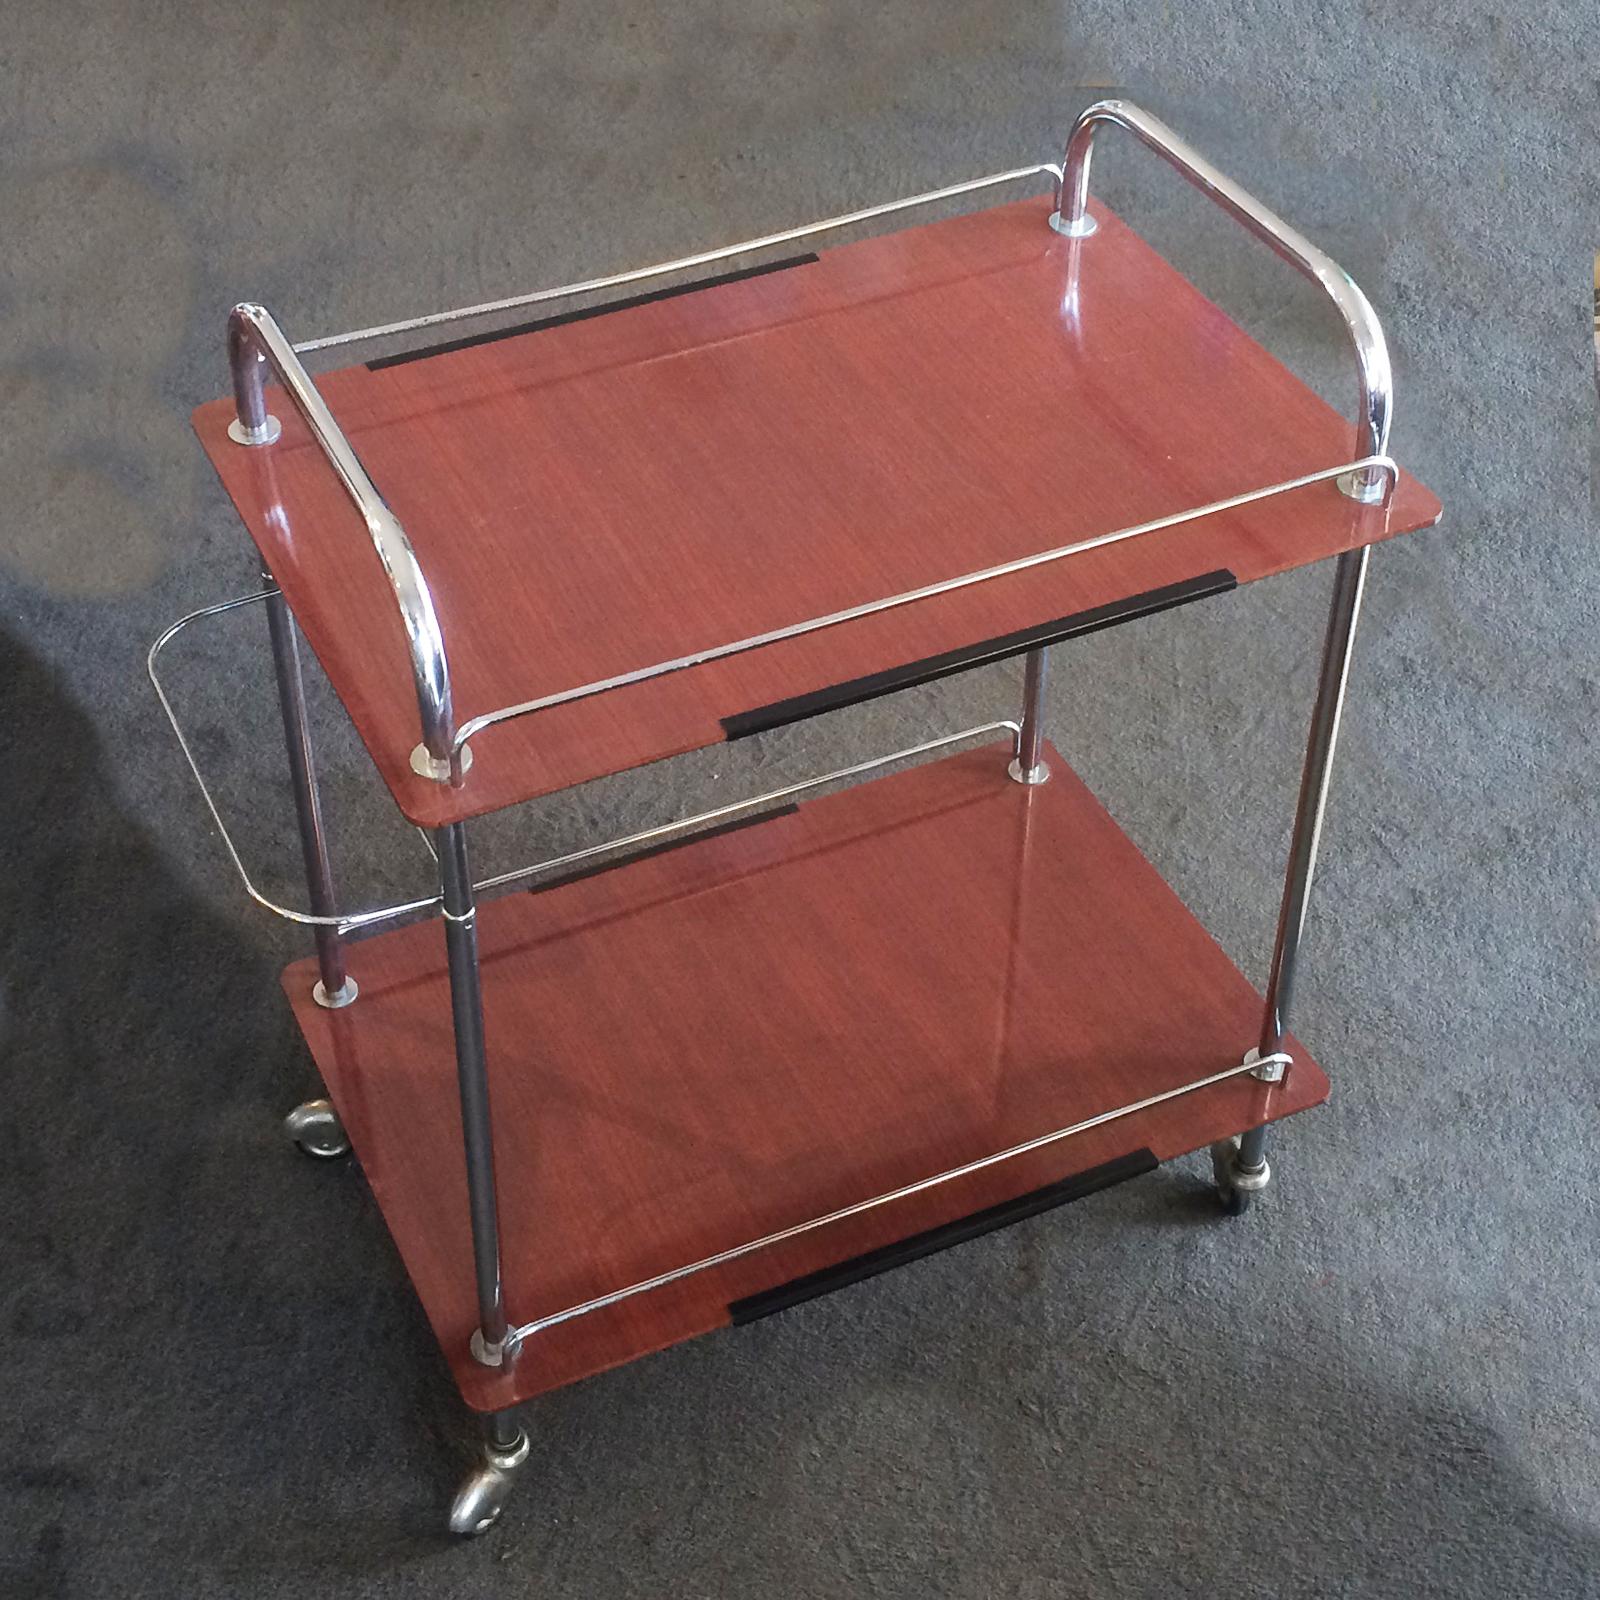 Midcentury French rolling bar cart, in chrome with nickel hubcaps and two shelf levels of display in brown woodgrain finish. It has a lower Towel rail at rear which is a useful addition, which is not on all other trolleys. The wheels run easily, are